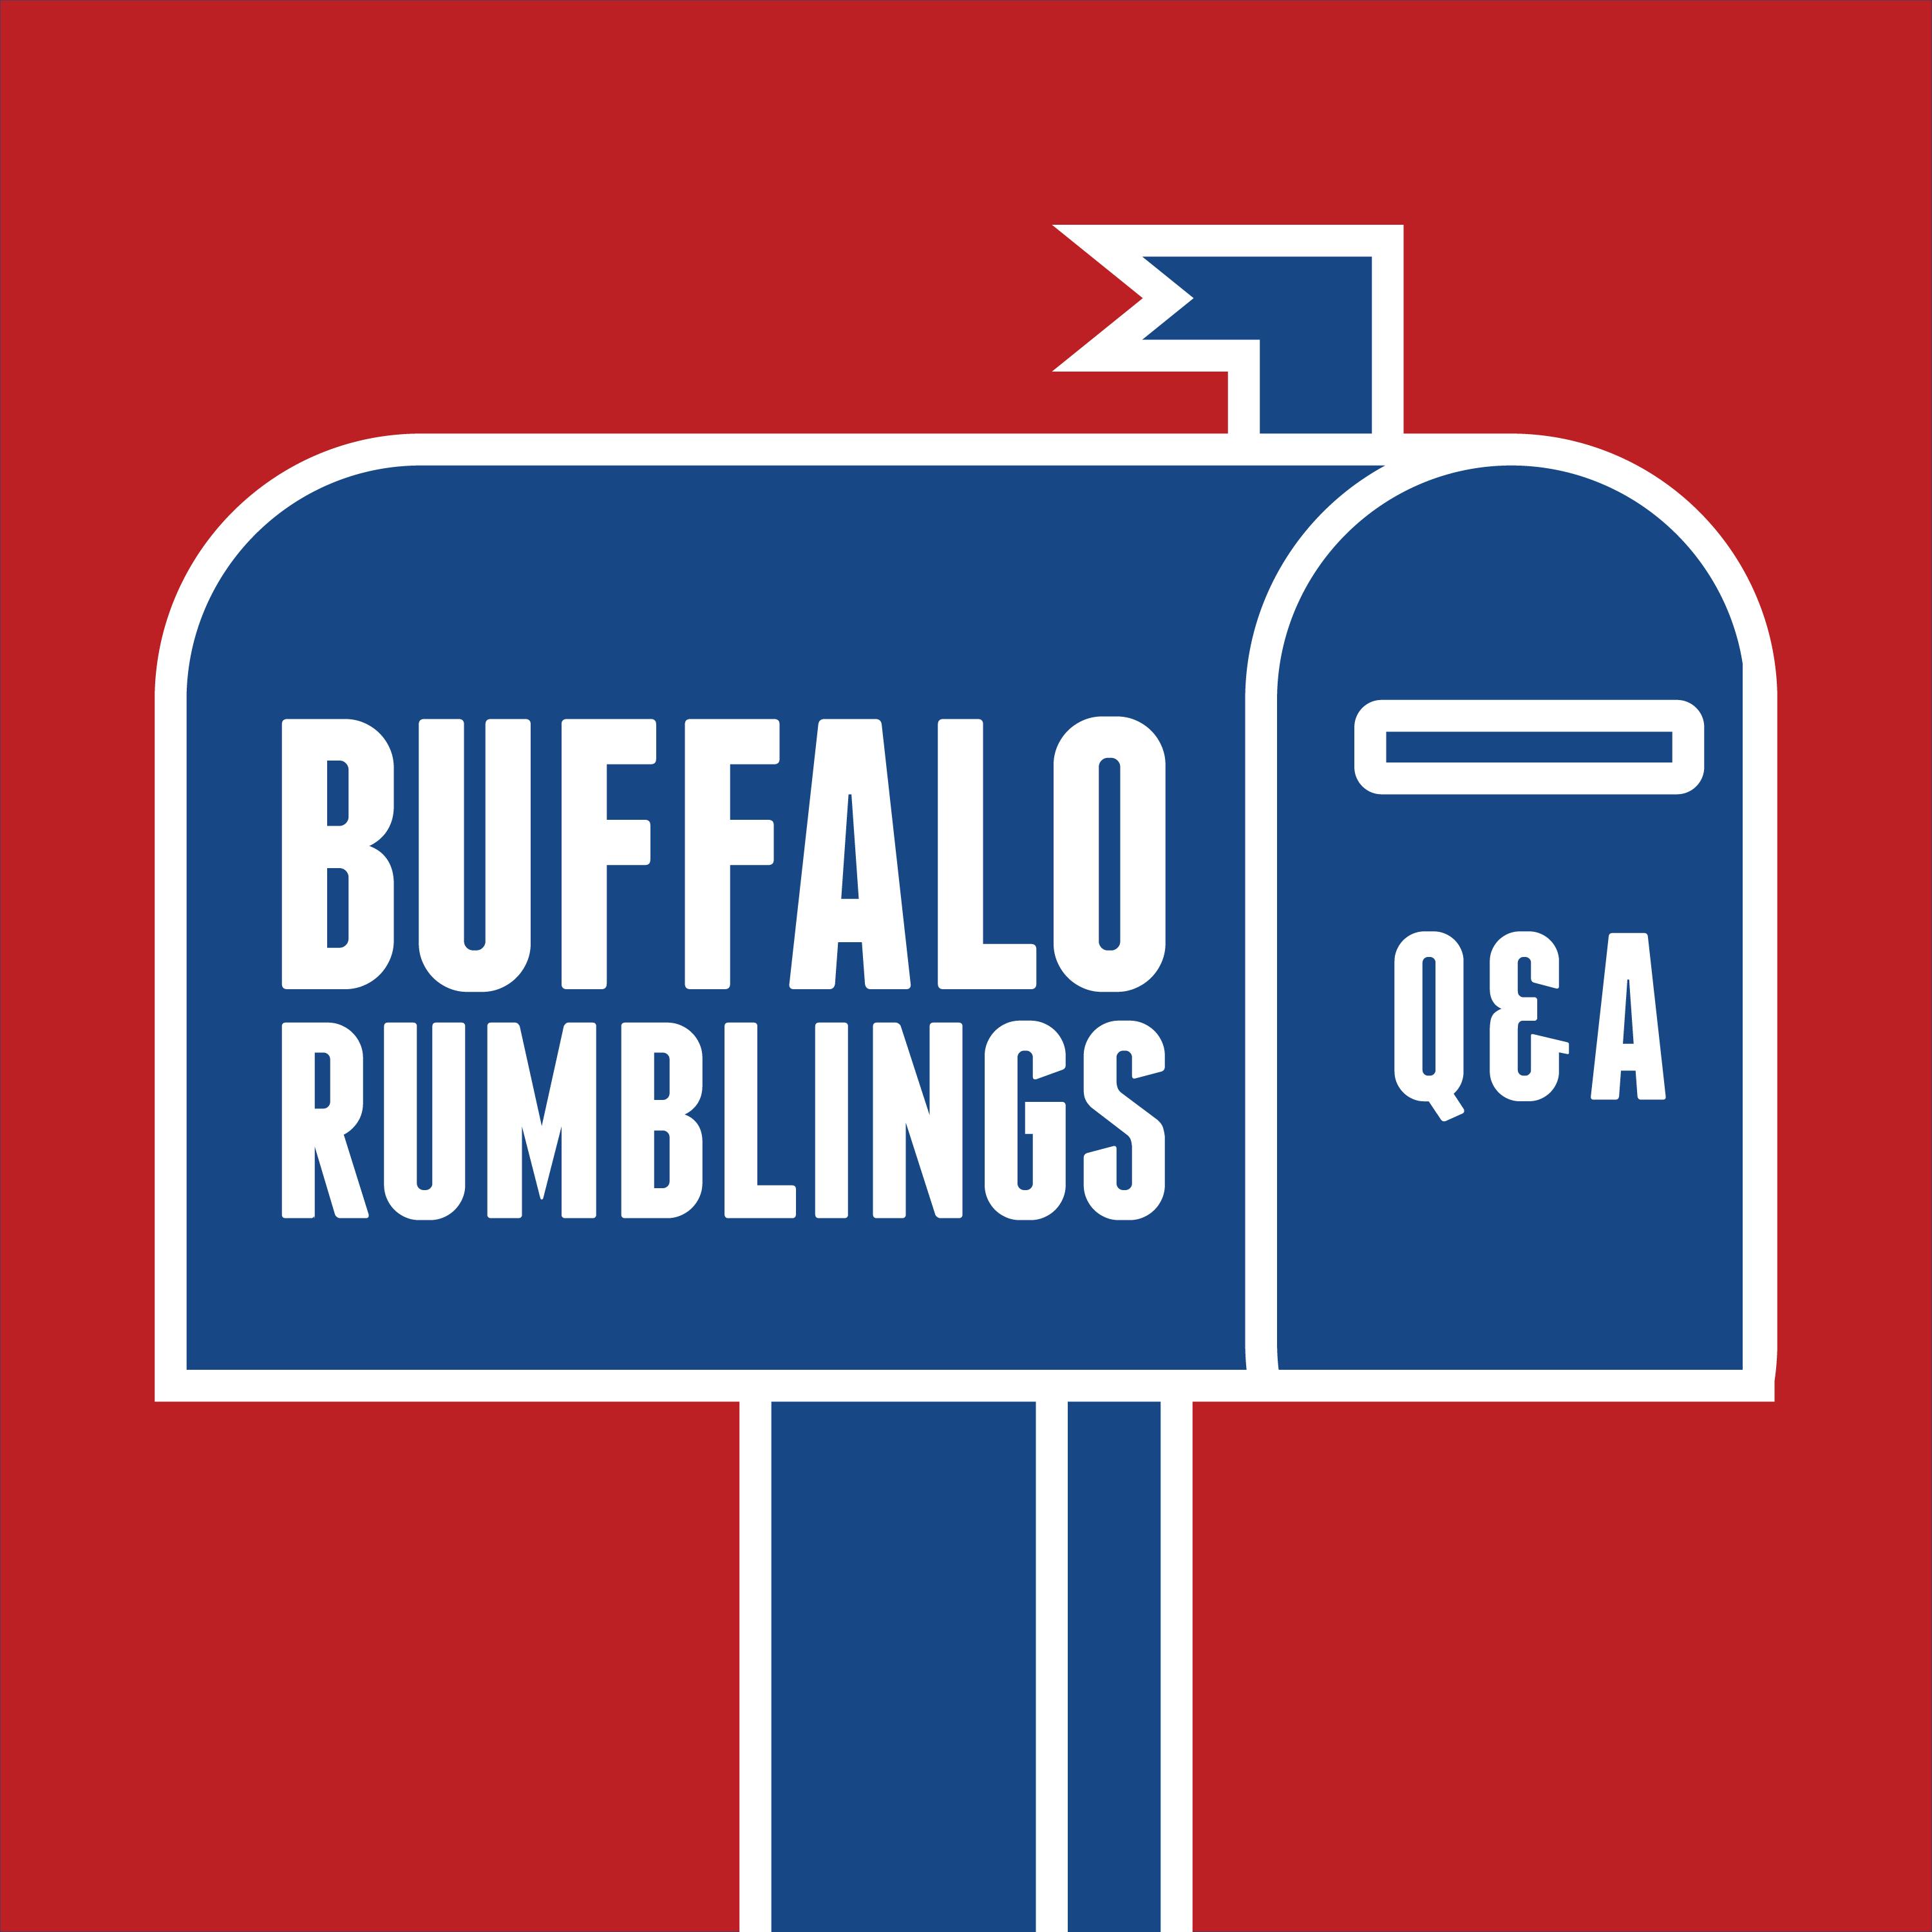 Q&A: Bills soapbox issues include stadium location, fan jersey selection, 4th down decisions